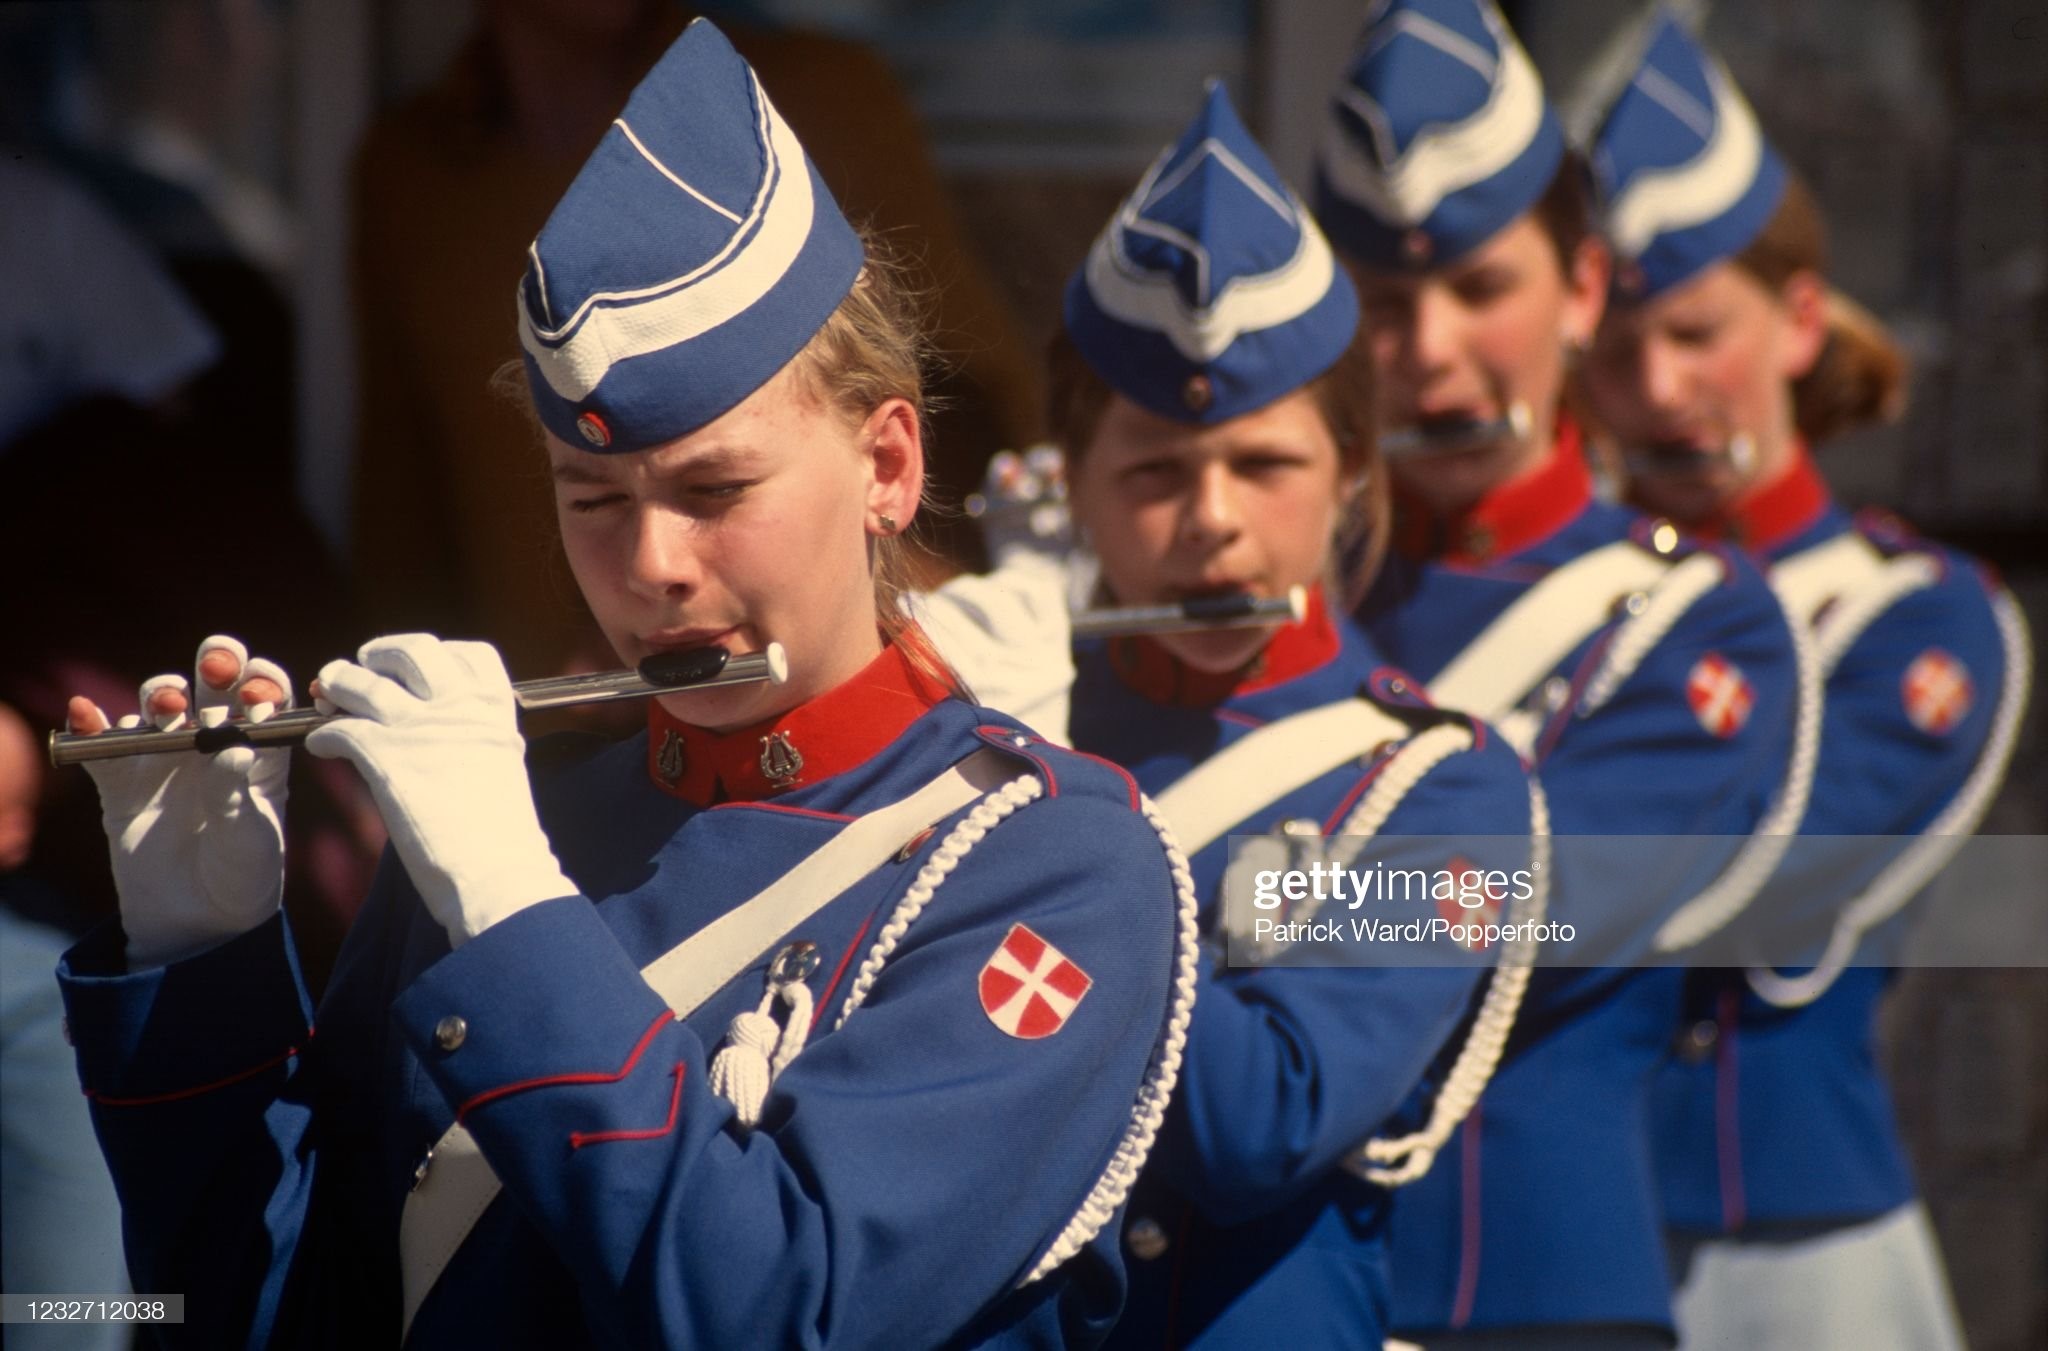 Young women playing fifes, a small flute, in a marching band in Akureyri, Iceland, circa June 1988.